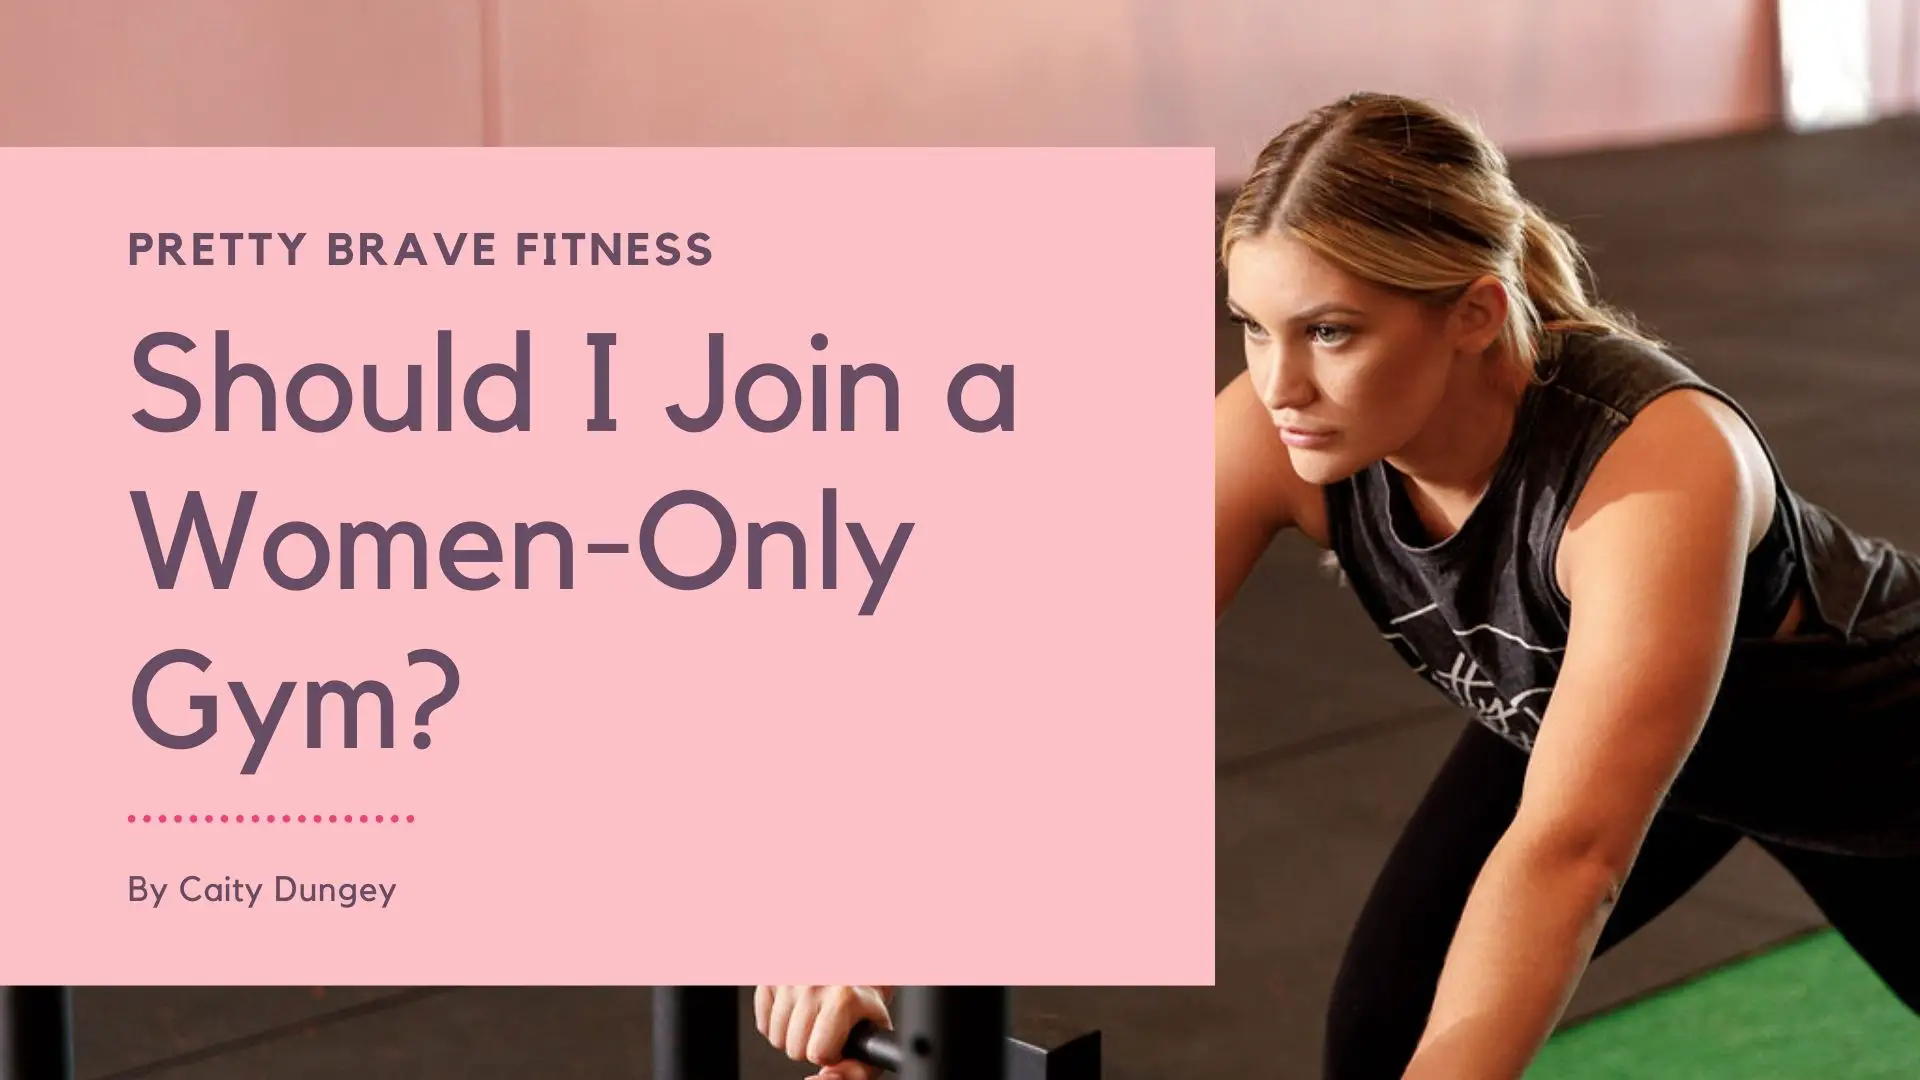 Should I Join a Women-Only Gym